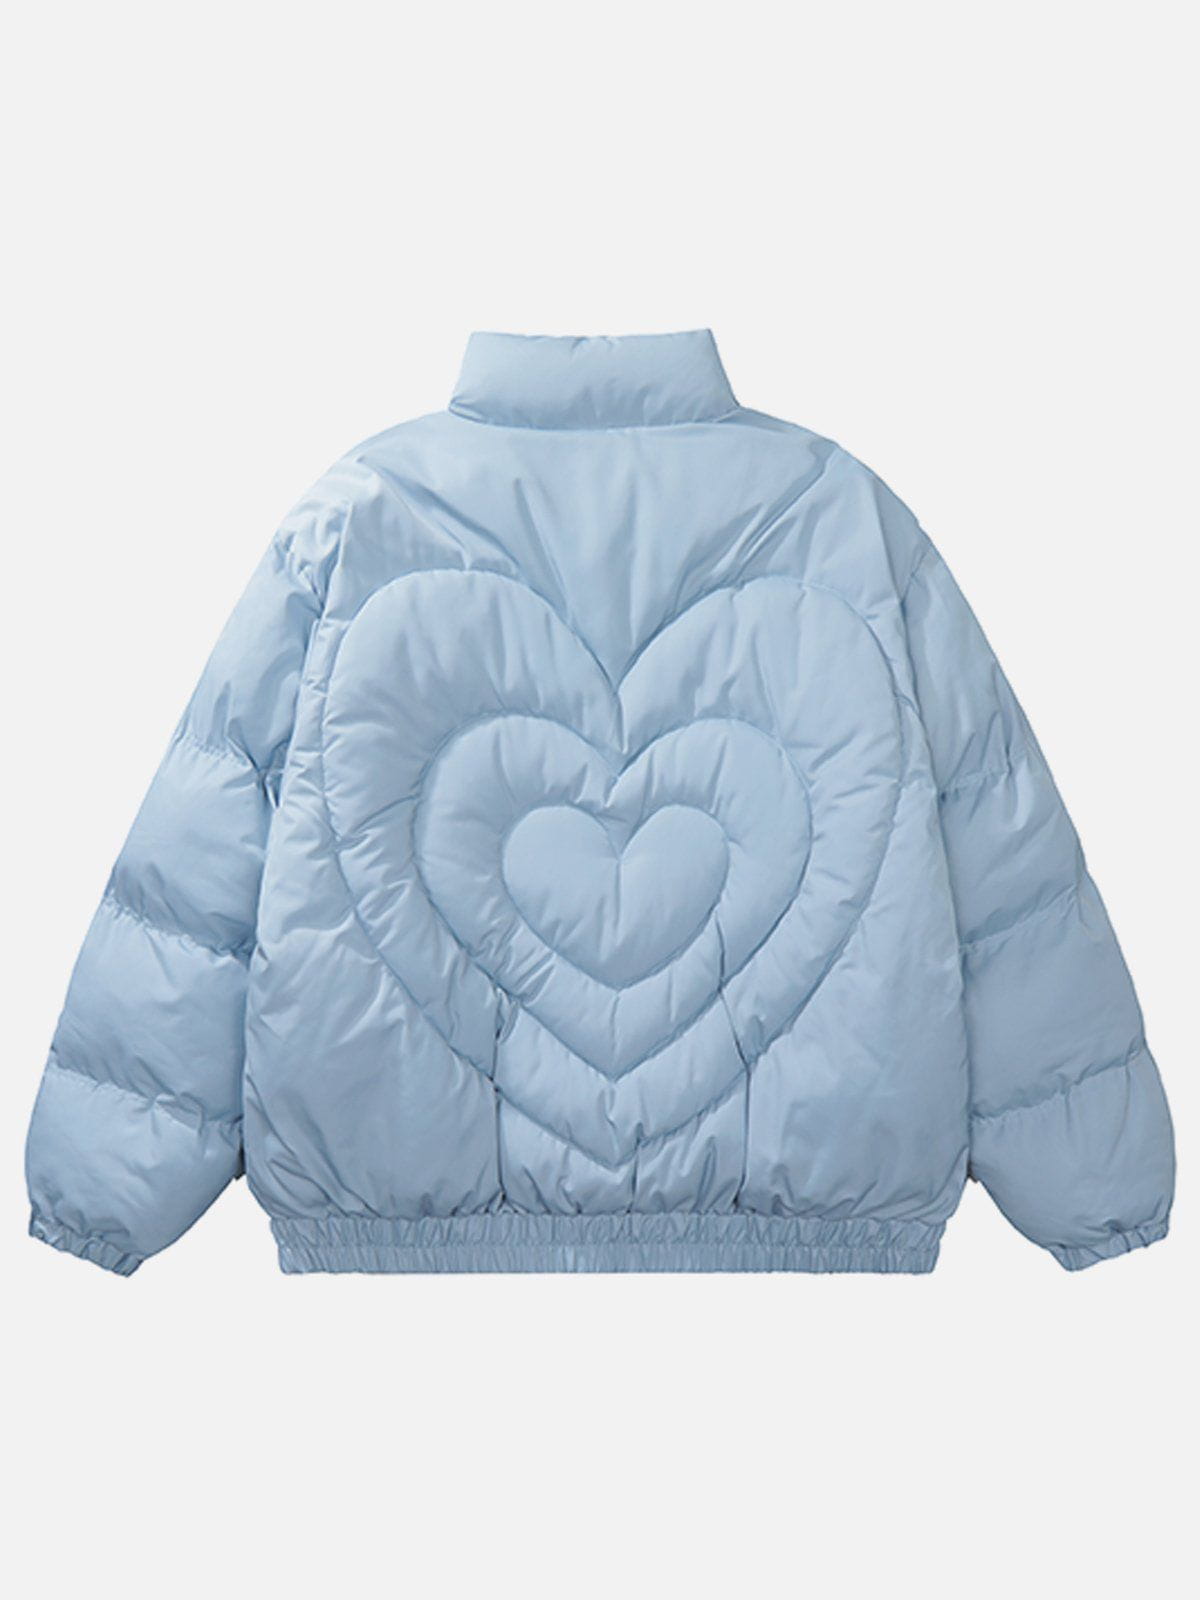 LUXENFY™ - Solid Color Heart Design Winter Coat luxenfy.com